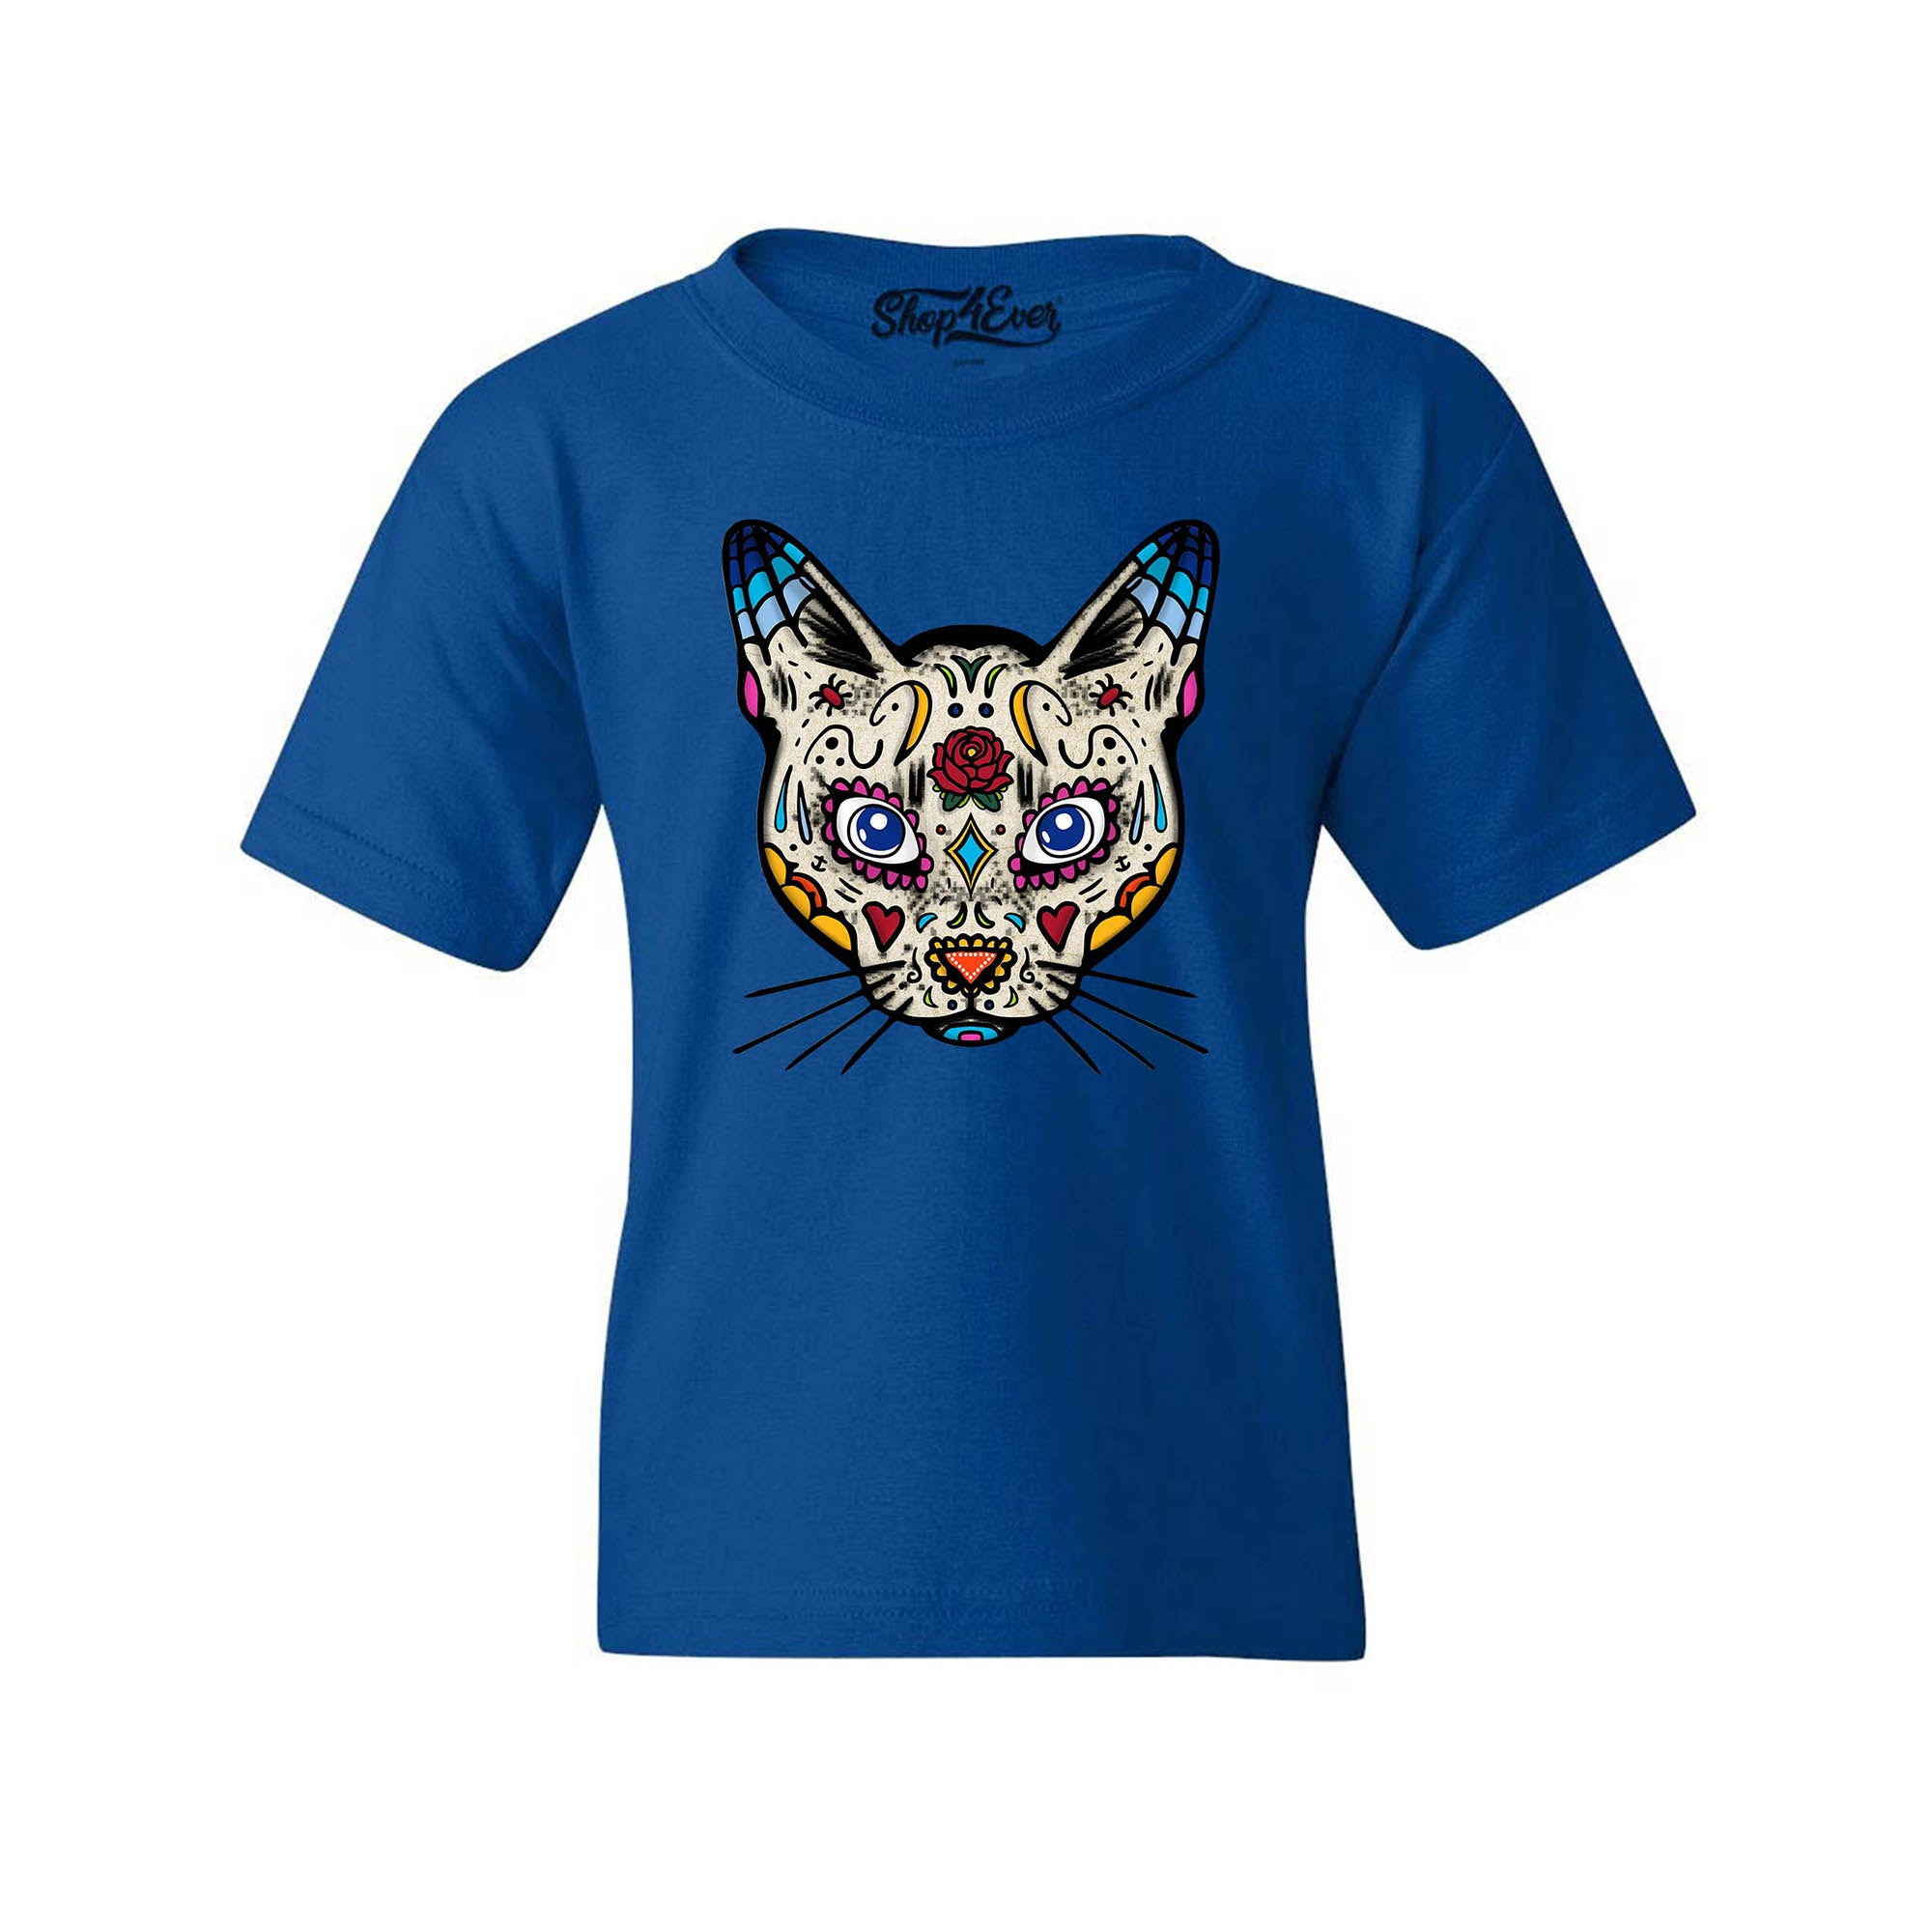 Day of The Dead Skull Child's Tee Sugar Cat Youth's T-Shirt